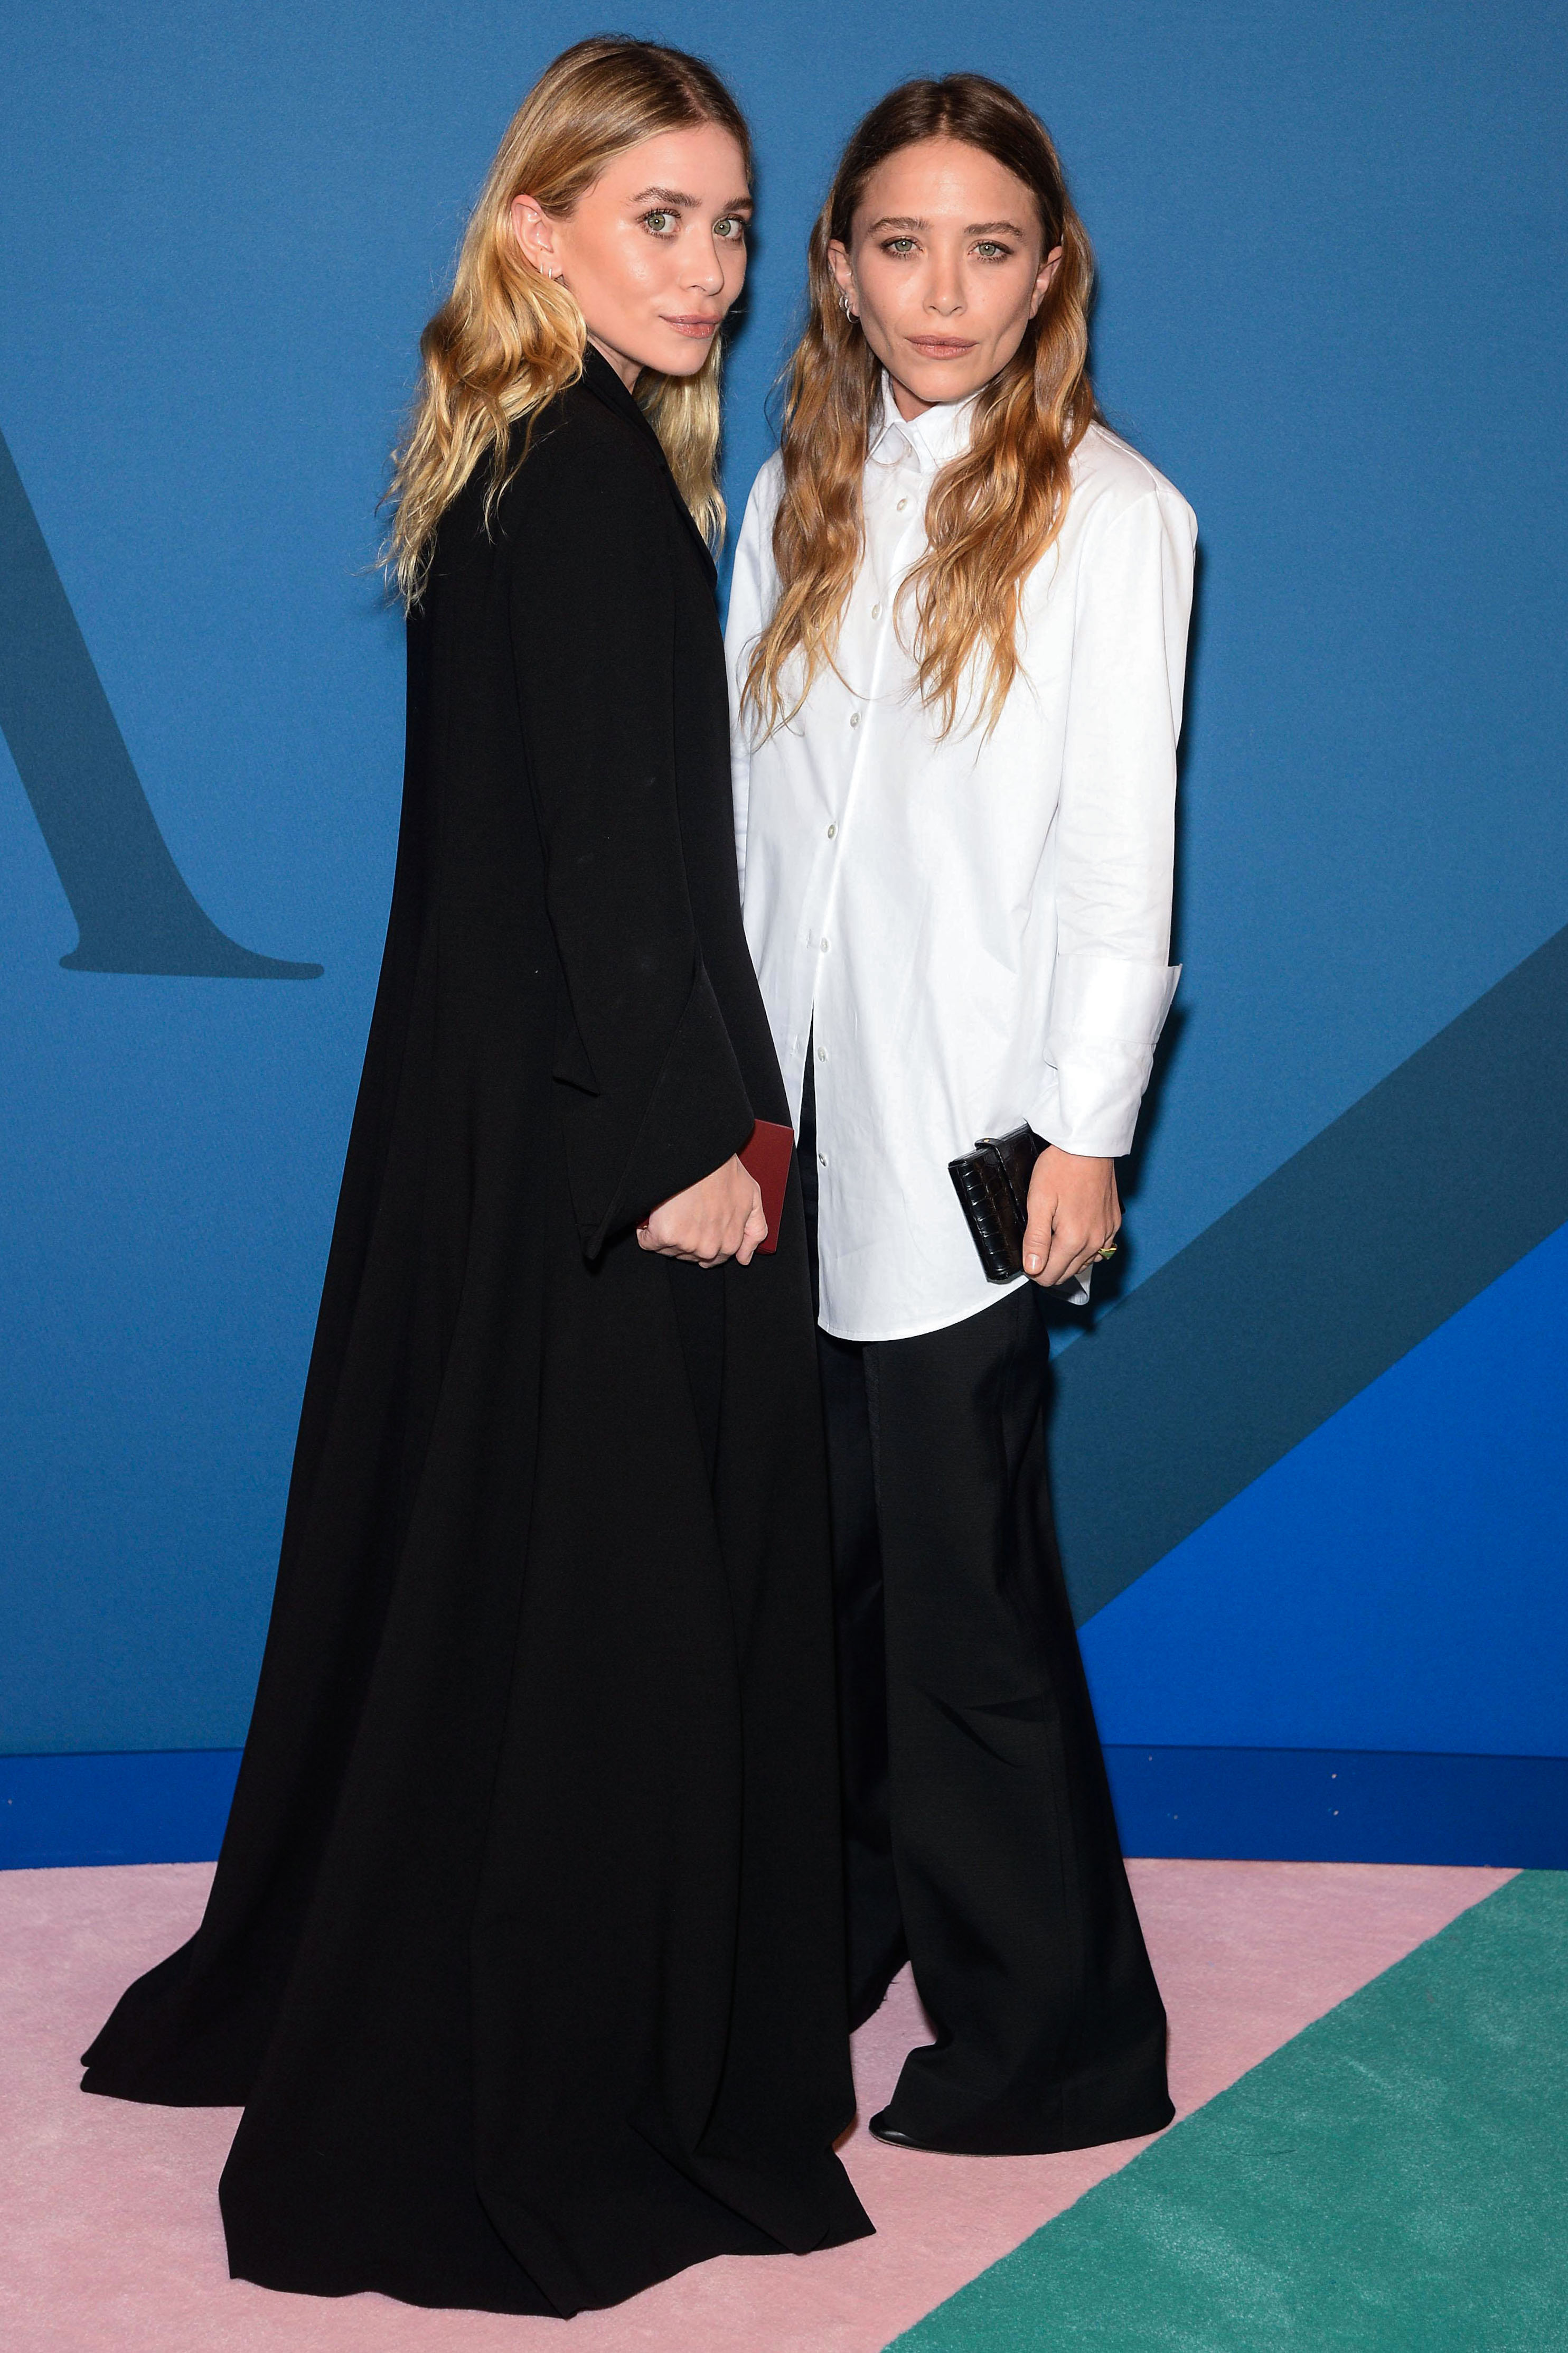 Mary-Kate and Ashley Olsen Transformation Over the Years: Photos